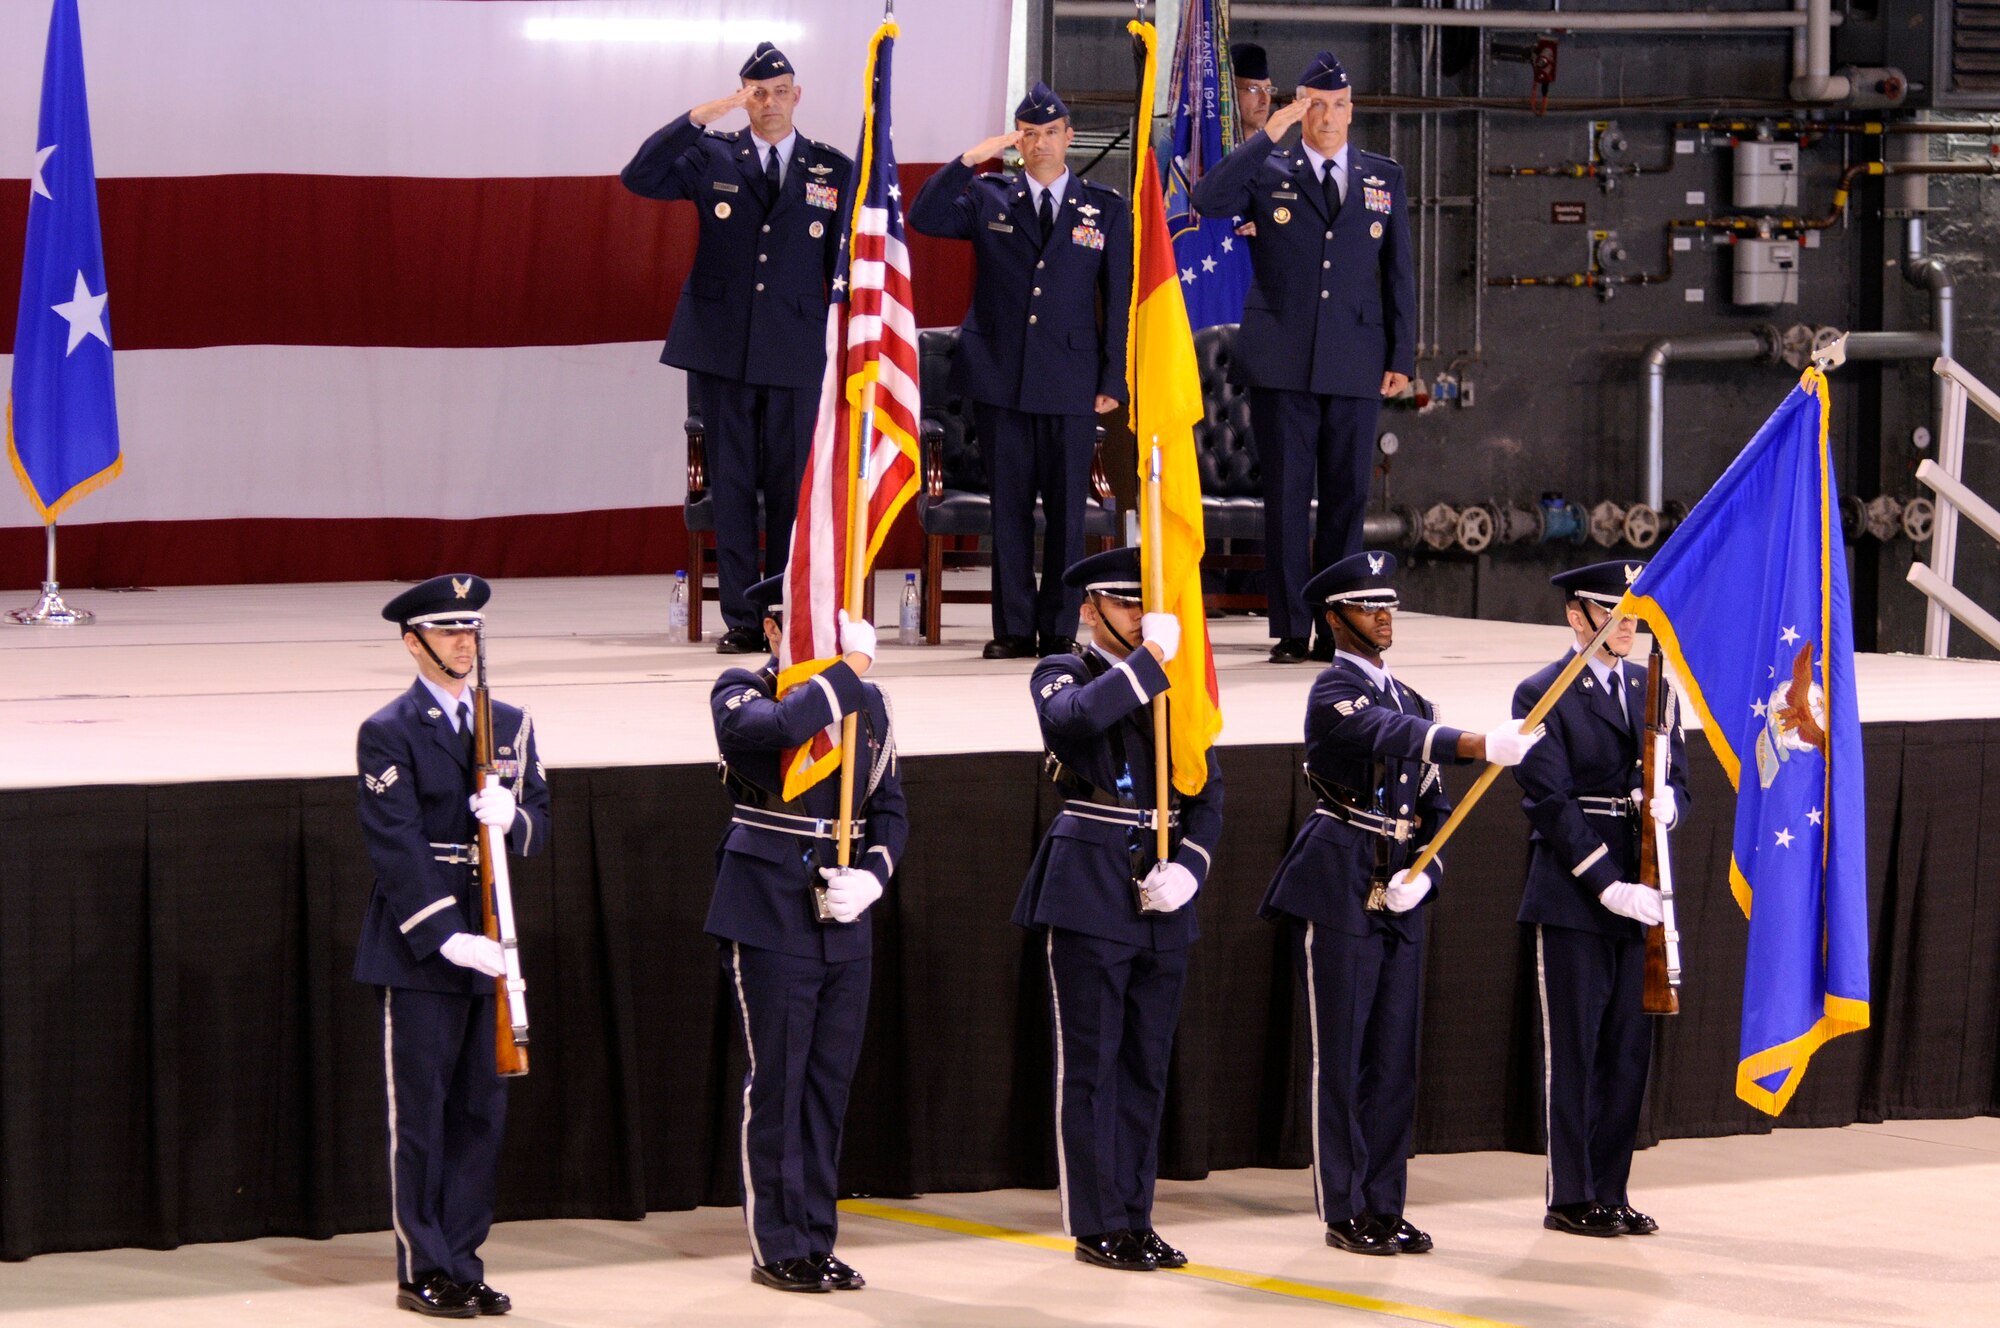 U.S. Air Force Maj. Gen. Mark R. Zamzow, 3rd Air Force vice commander, Col. Donald Bacon,  former 435th  Air Base Wing commander, newly appointed 435th  Air Base Wing, Col. Thomas F. Gould salutes during the posting of the colors, at the 435th Air Base Wing Change of Command ceremony, Ramstein Air Base, Germany, June 11, 2009. (U.S. Air Force photo by Tech. Sgt. Kenneth Bellard)